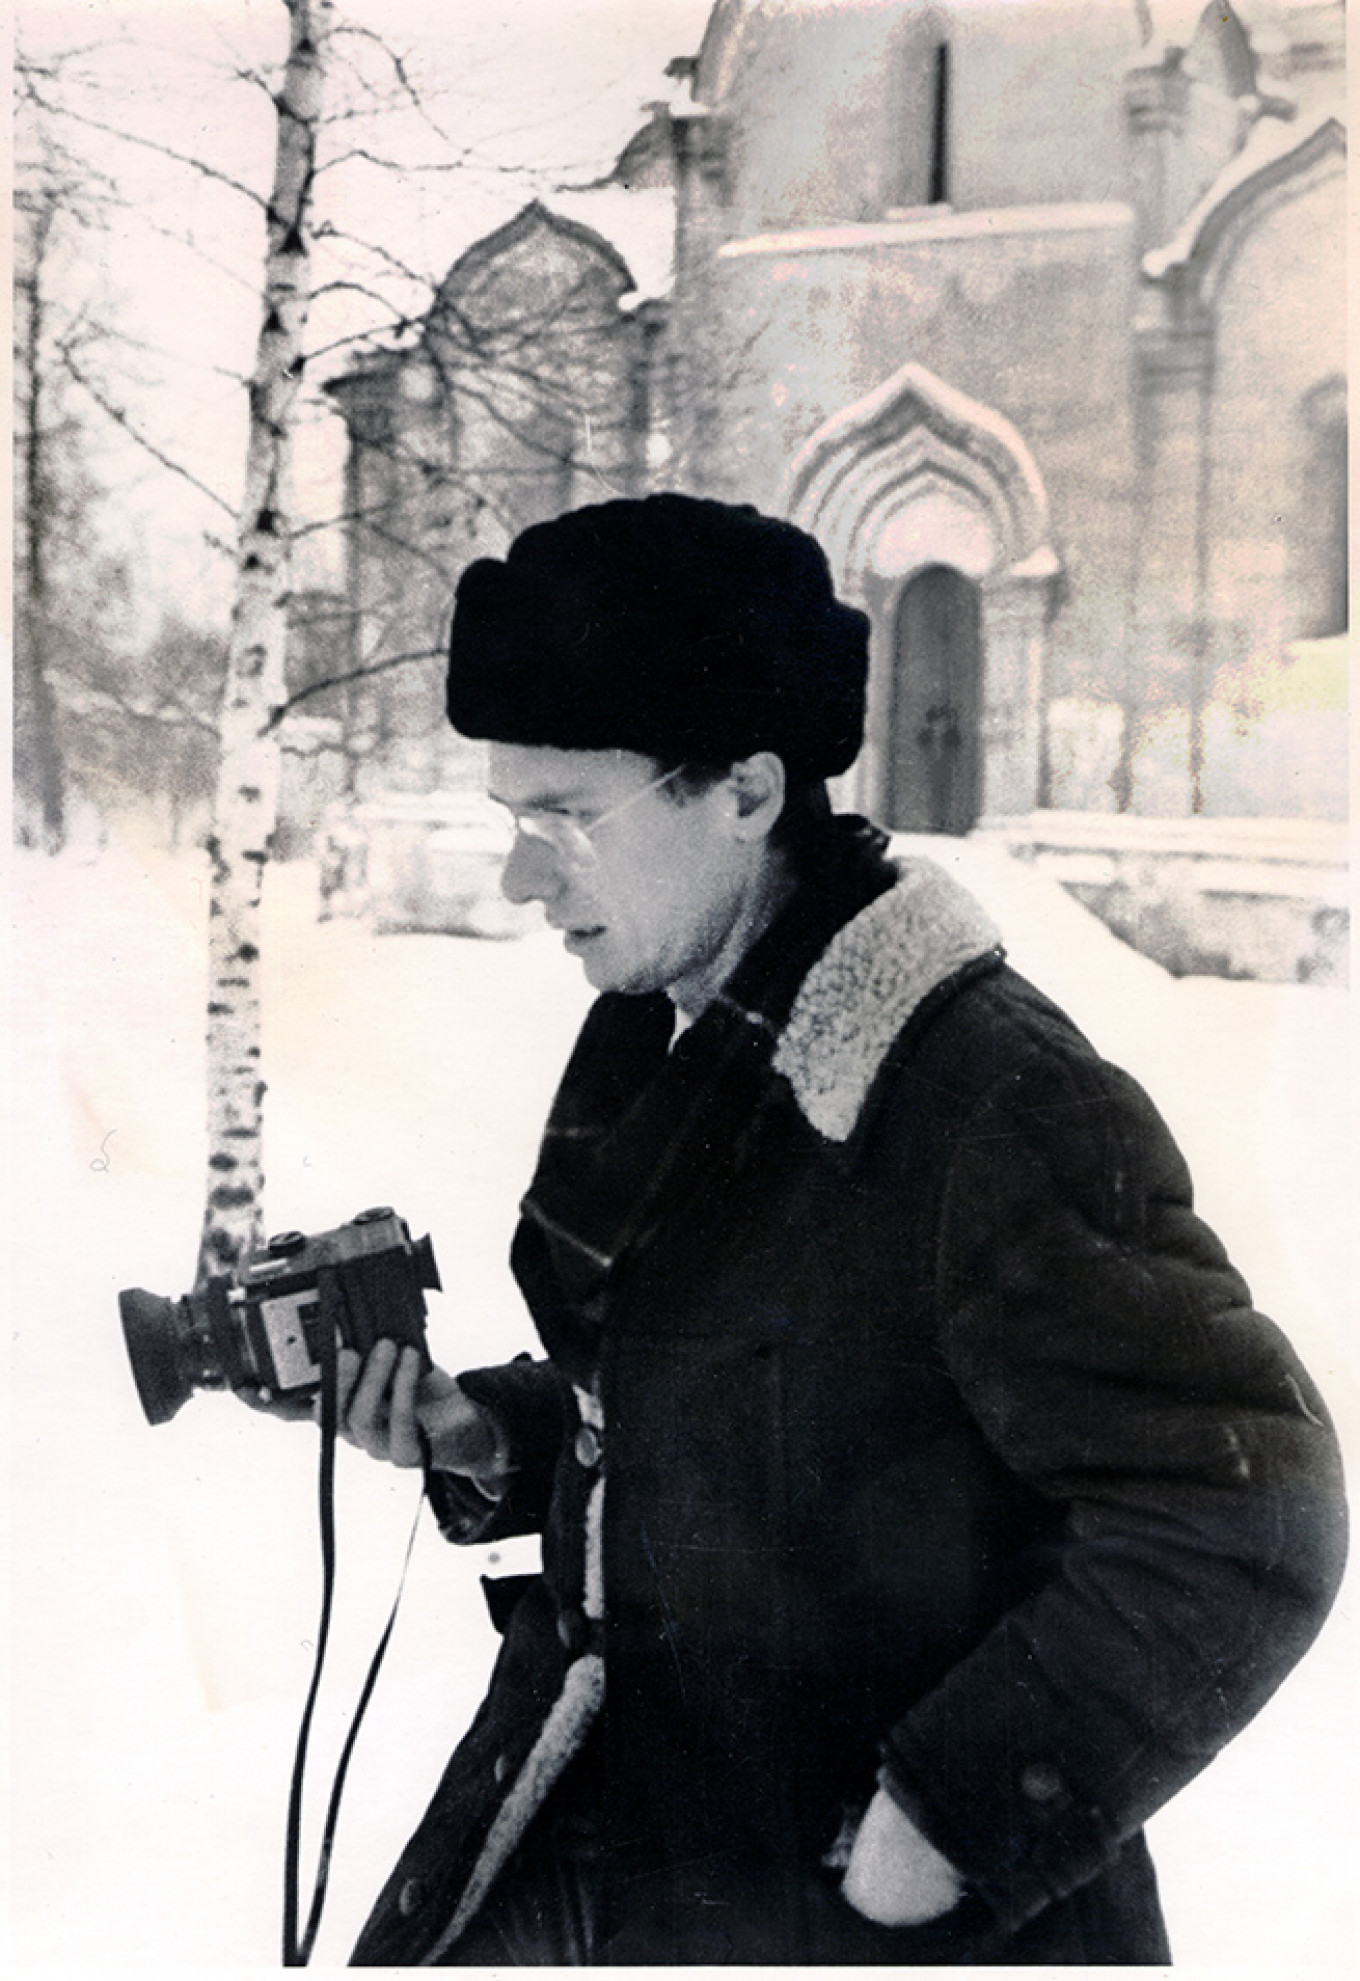  WC Brumfield at Savior-Andronikov Monastery, Moscow, Dec. 1979 Courtesy of author 